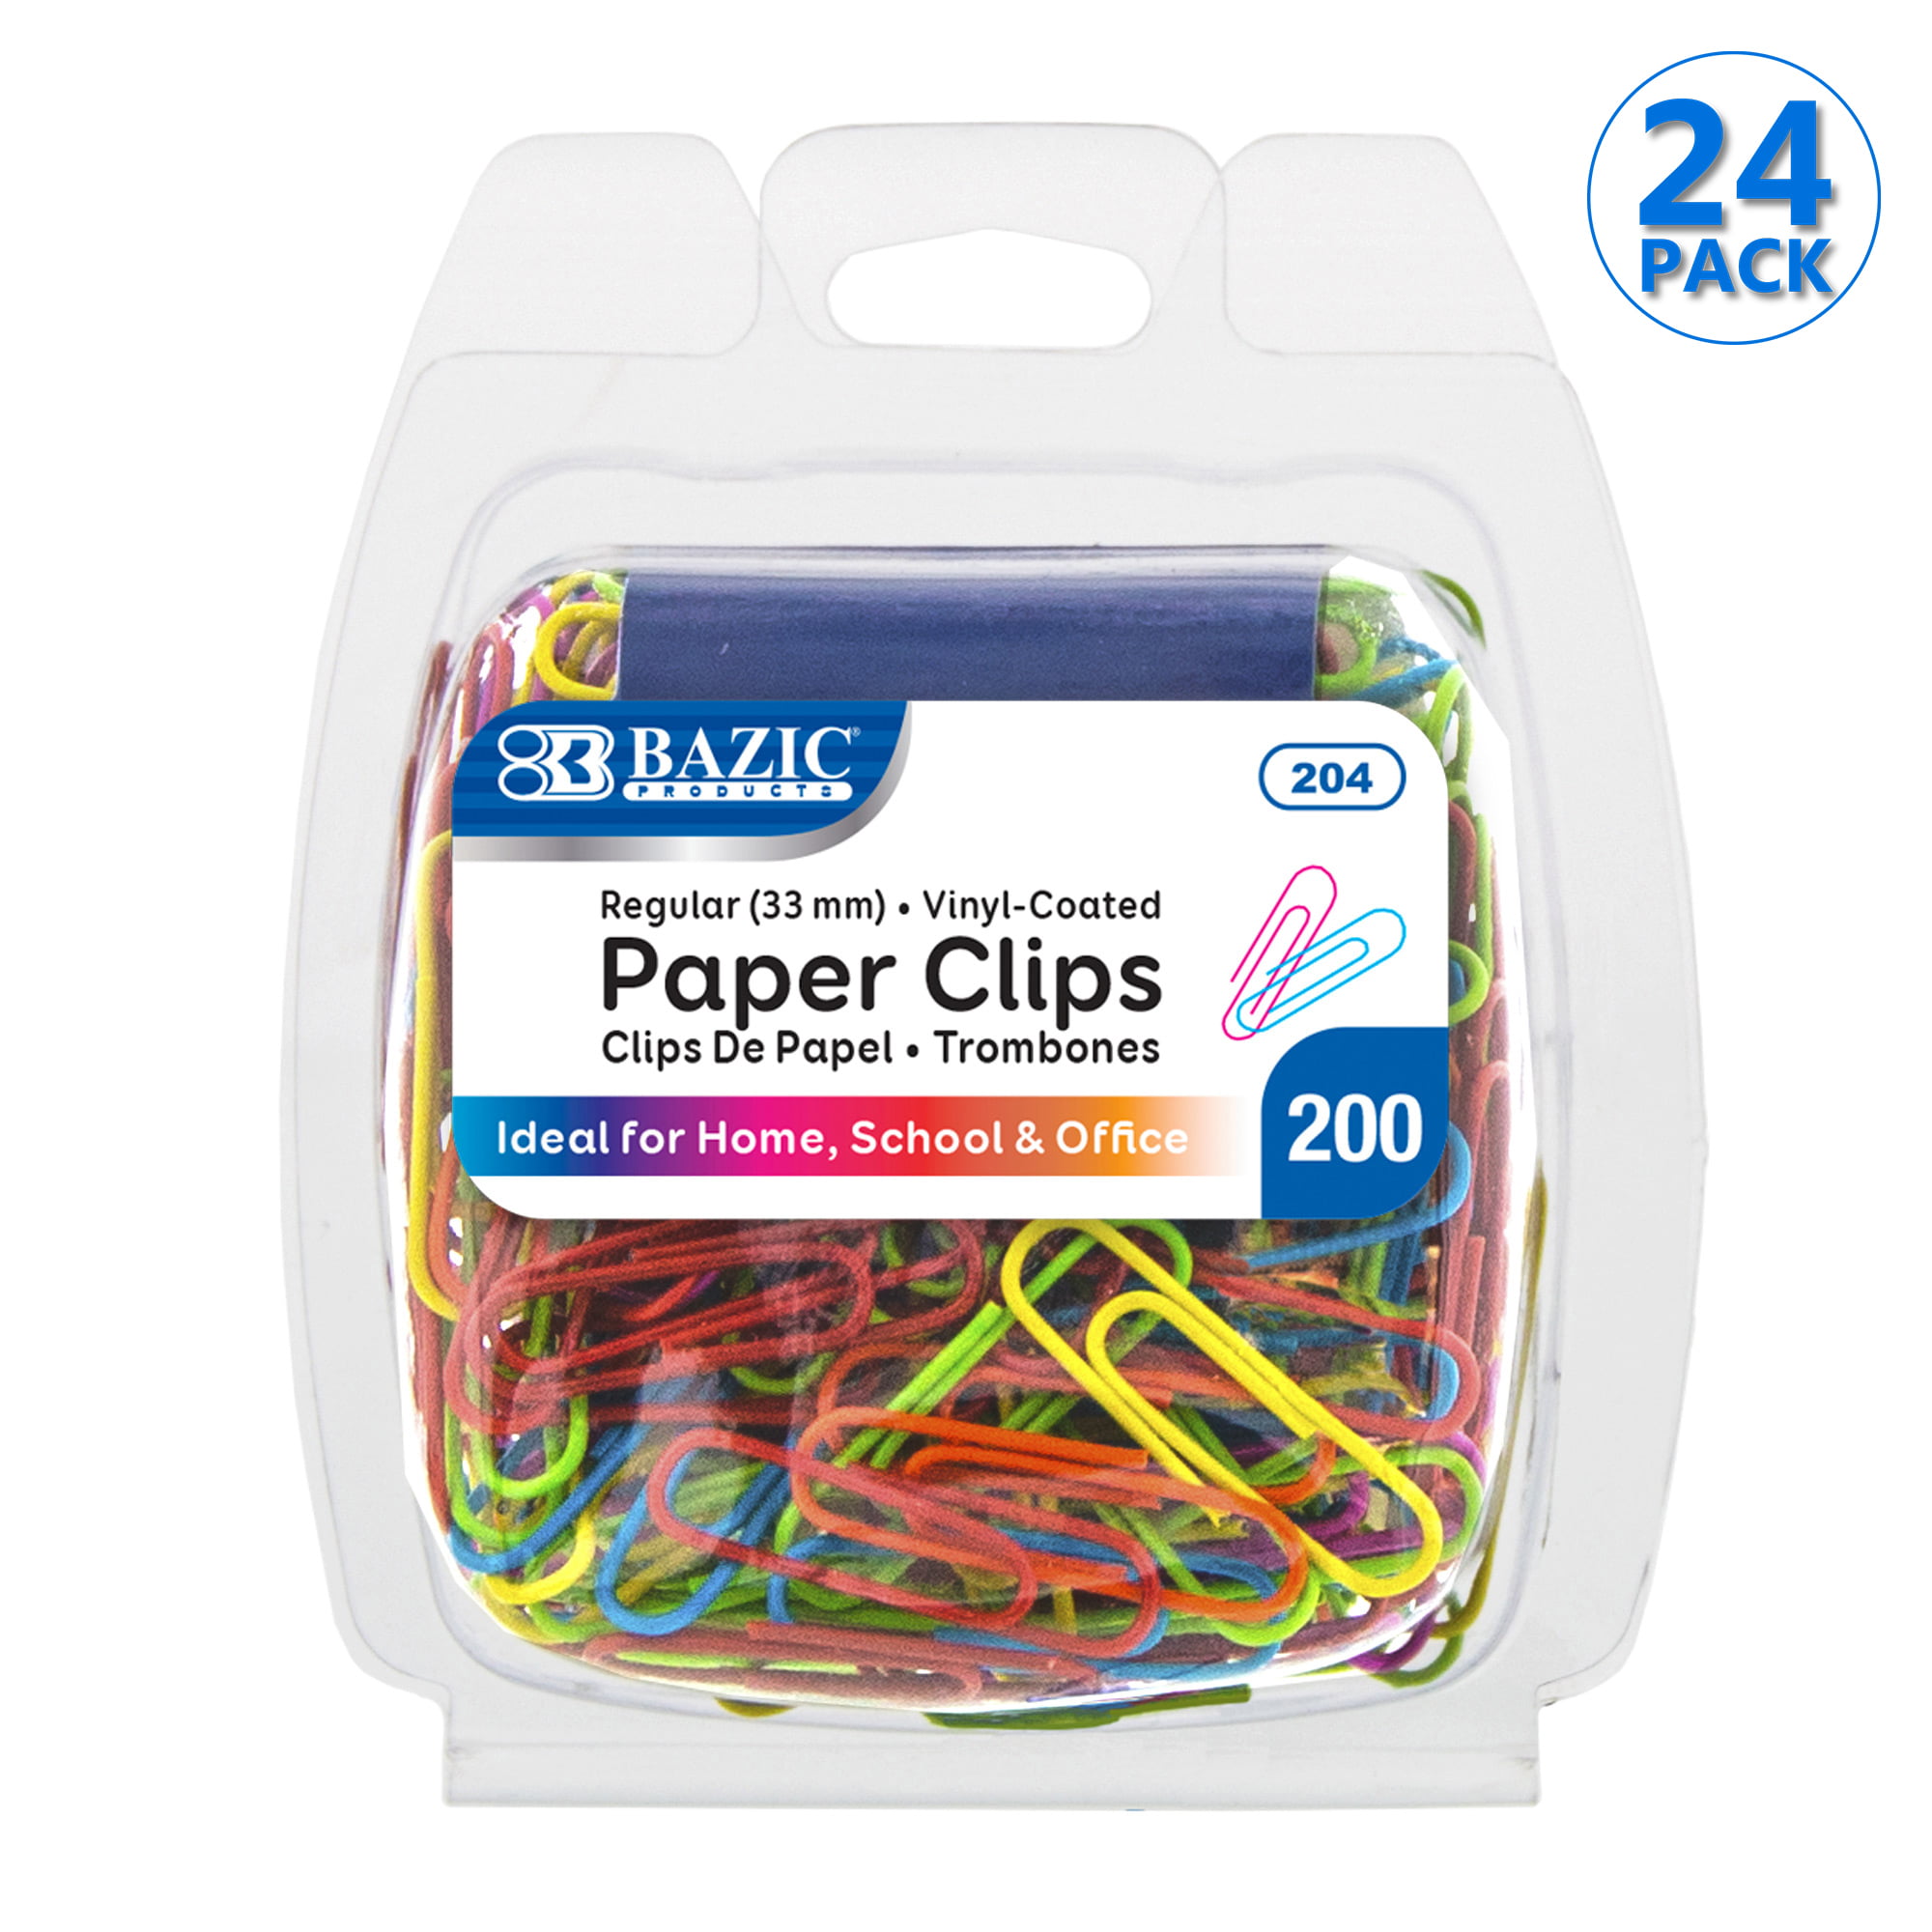 Tear Proof Paper Clips Silver Steel Metal Medium 33mm Size Flat Packed 